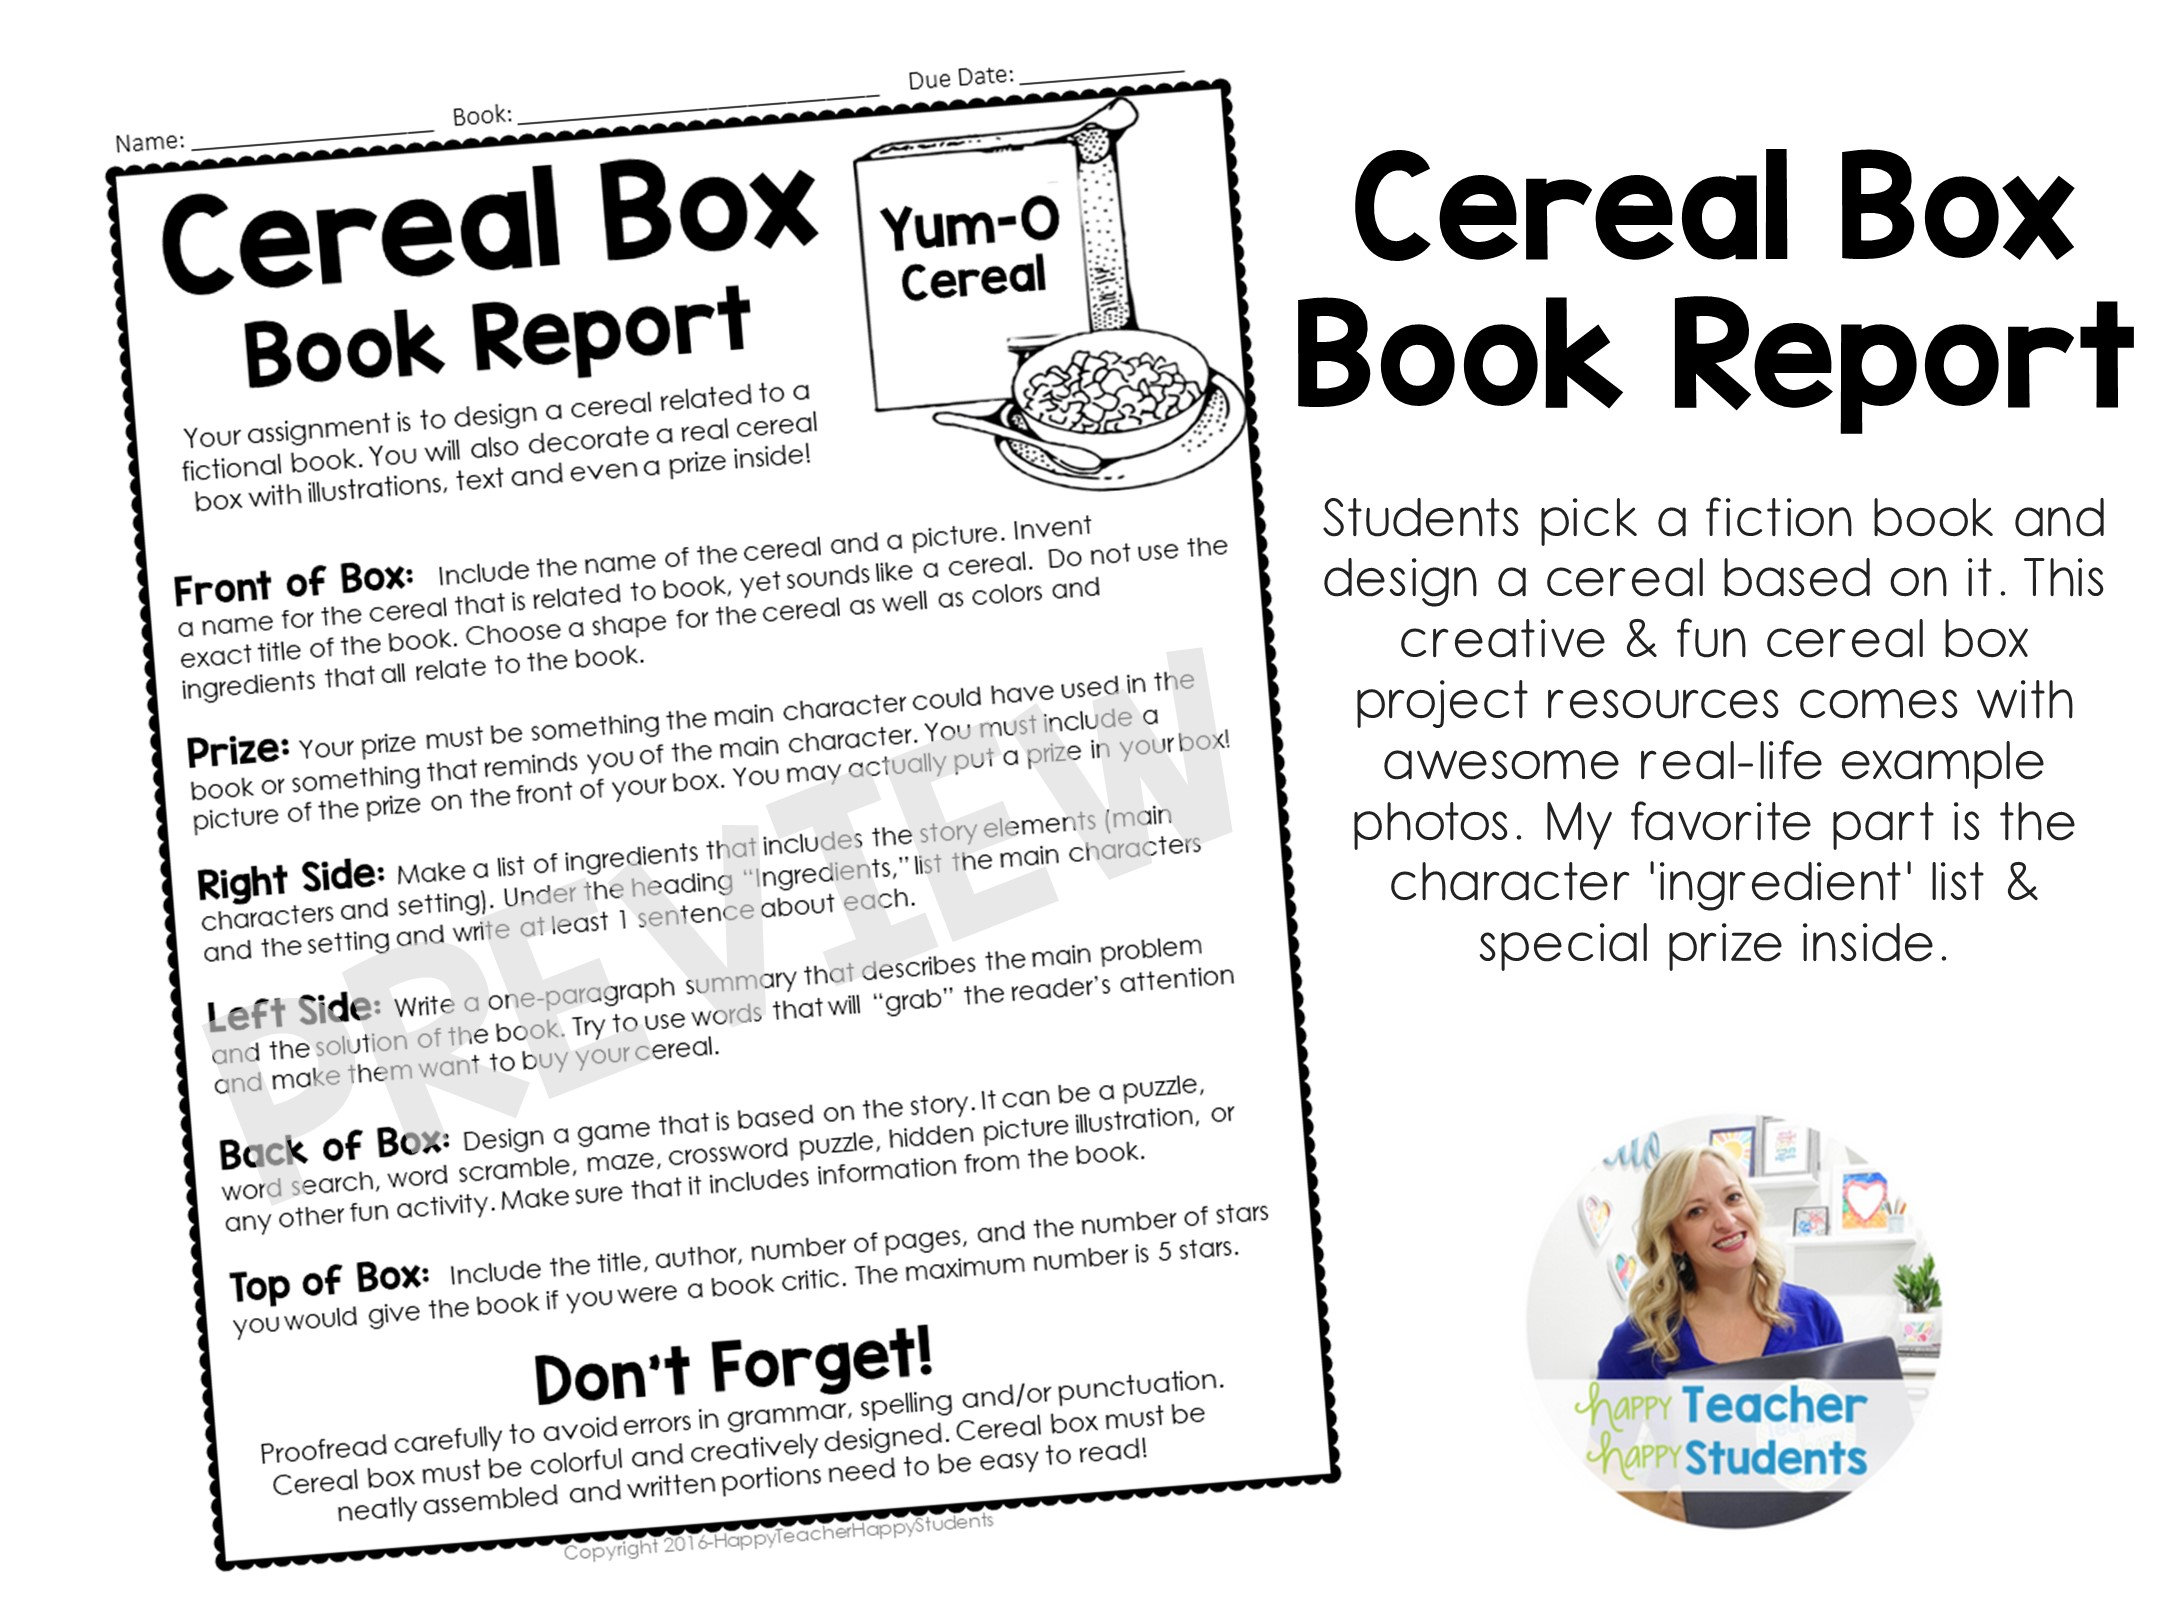 commercial for cereal box book report